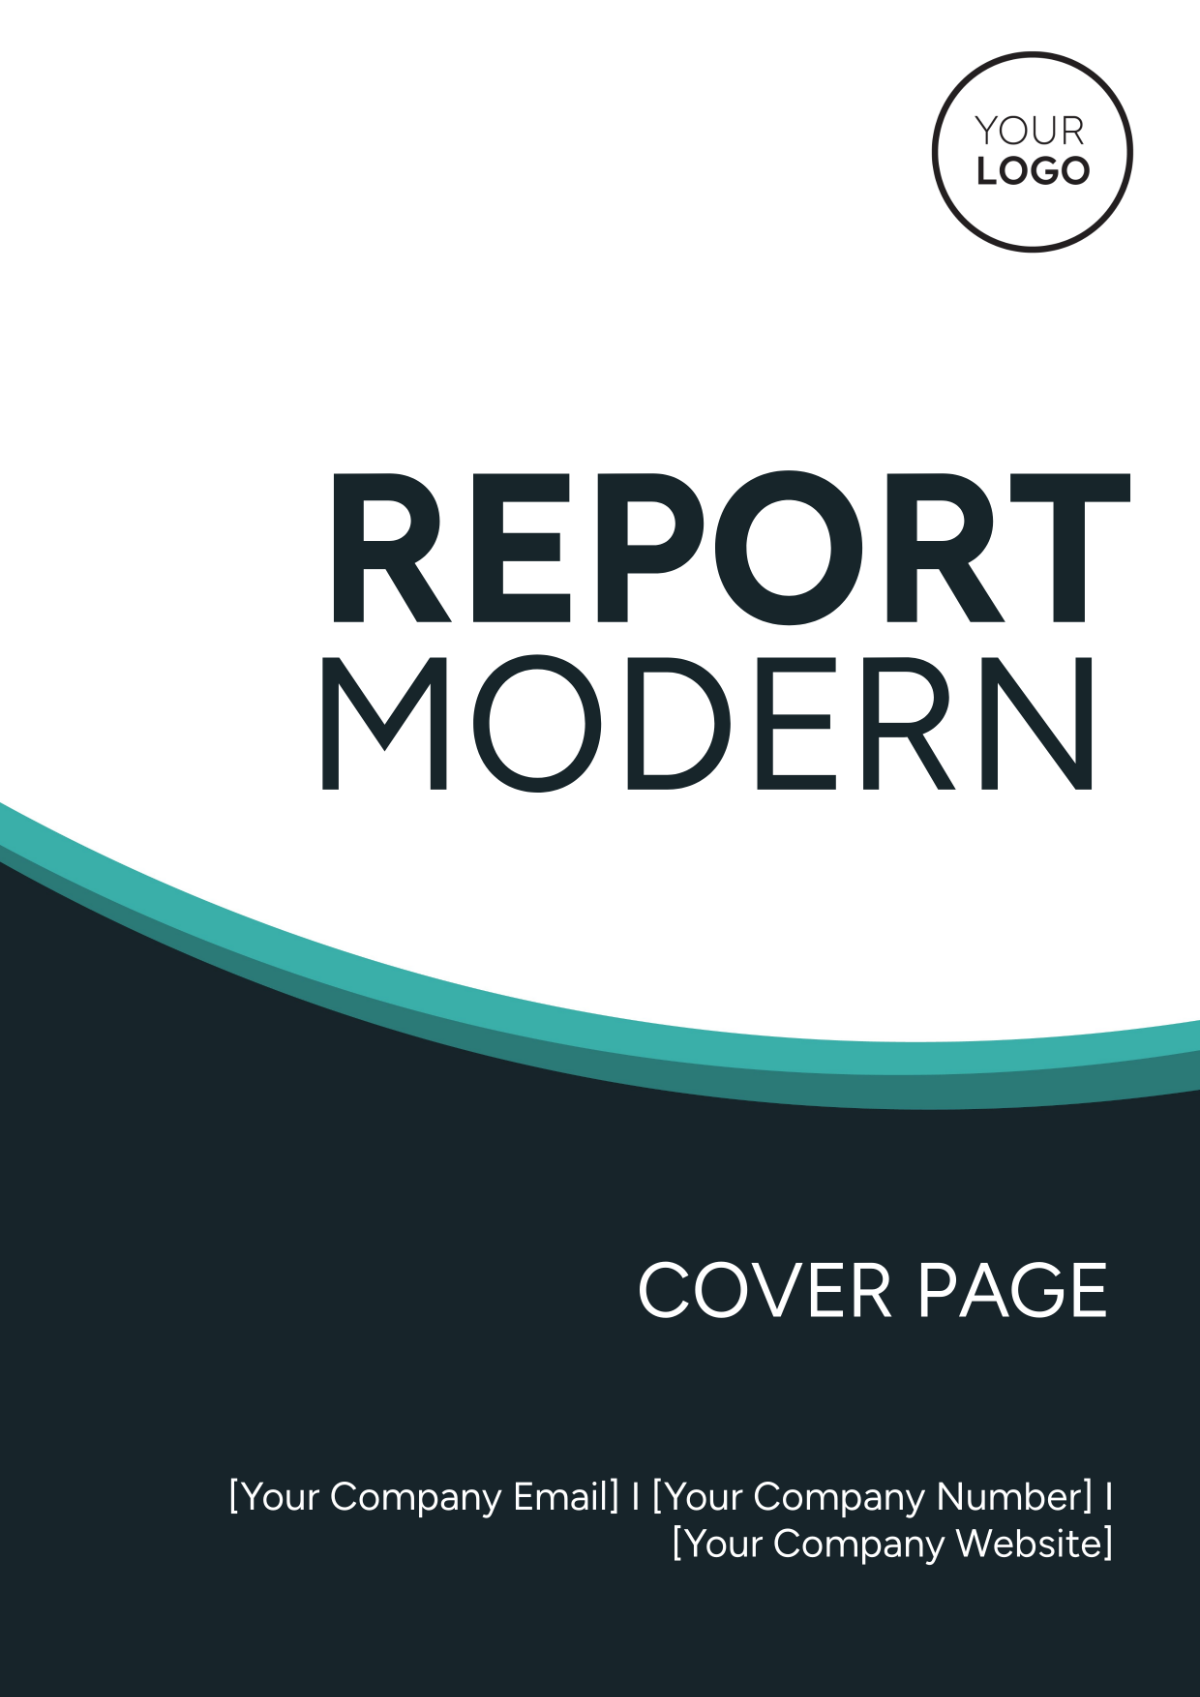 Report Modern Cover Page